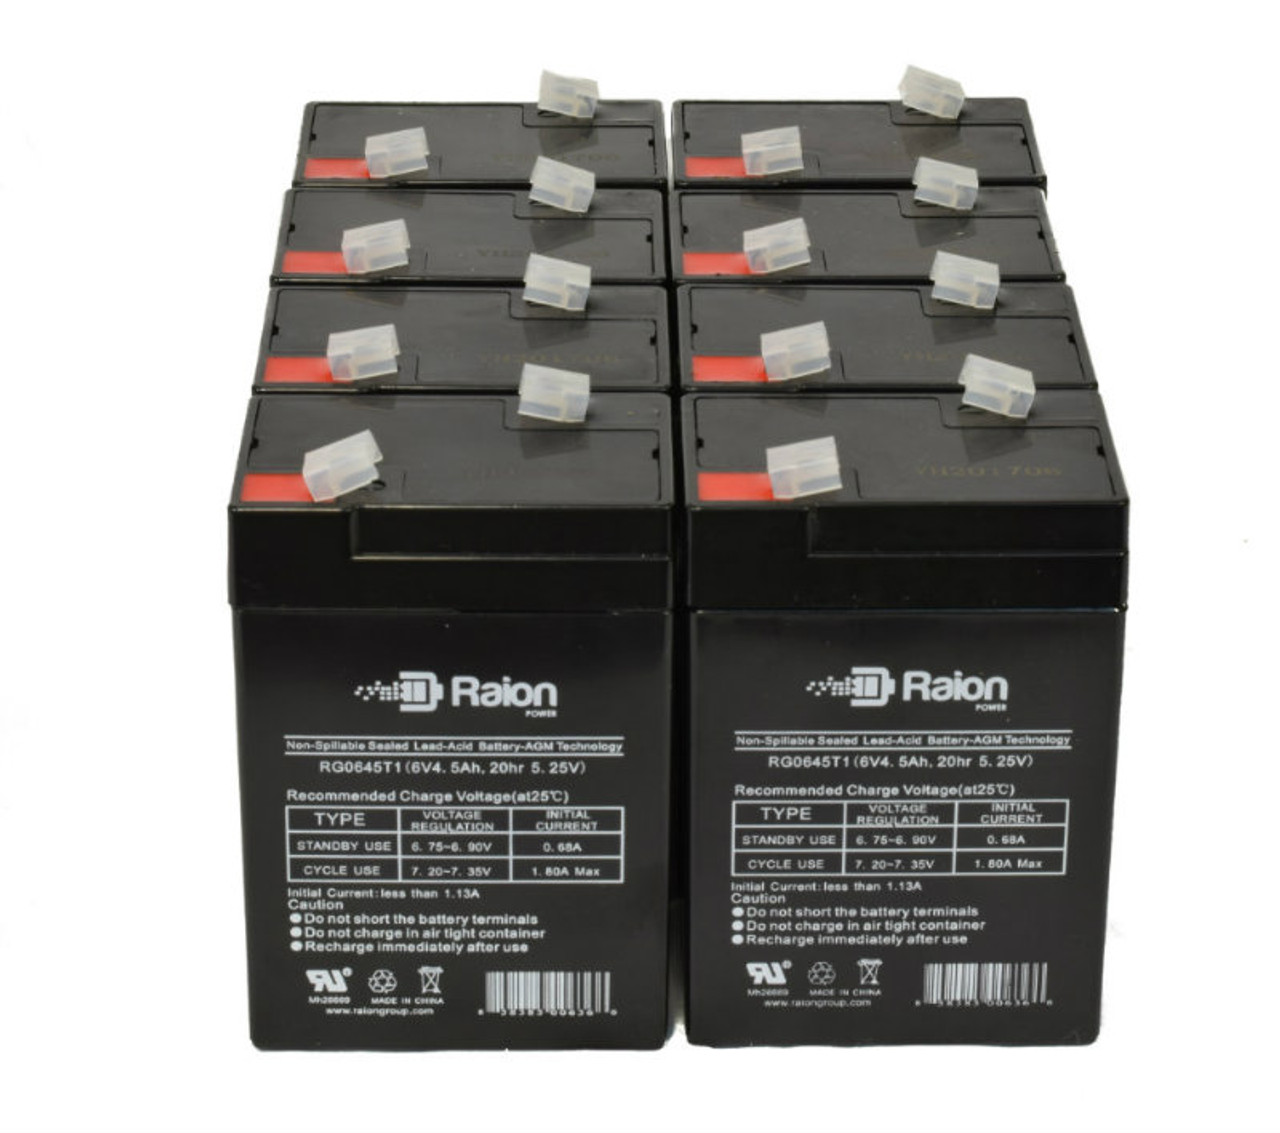 Raion Power RG0645T1 6V 4.5Ah Replacement Medical Equipment Battery for Criticare Systems 504Us Pulse Oximeters - 8 Pack